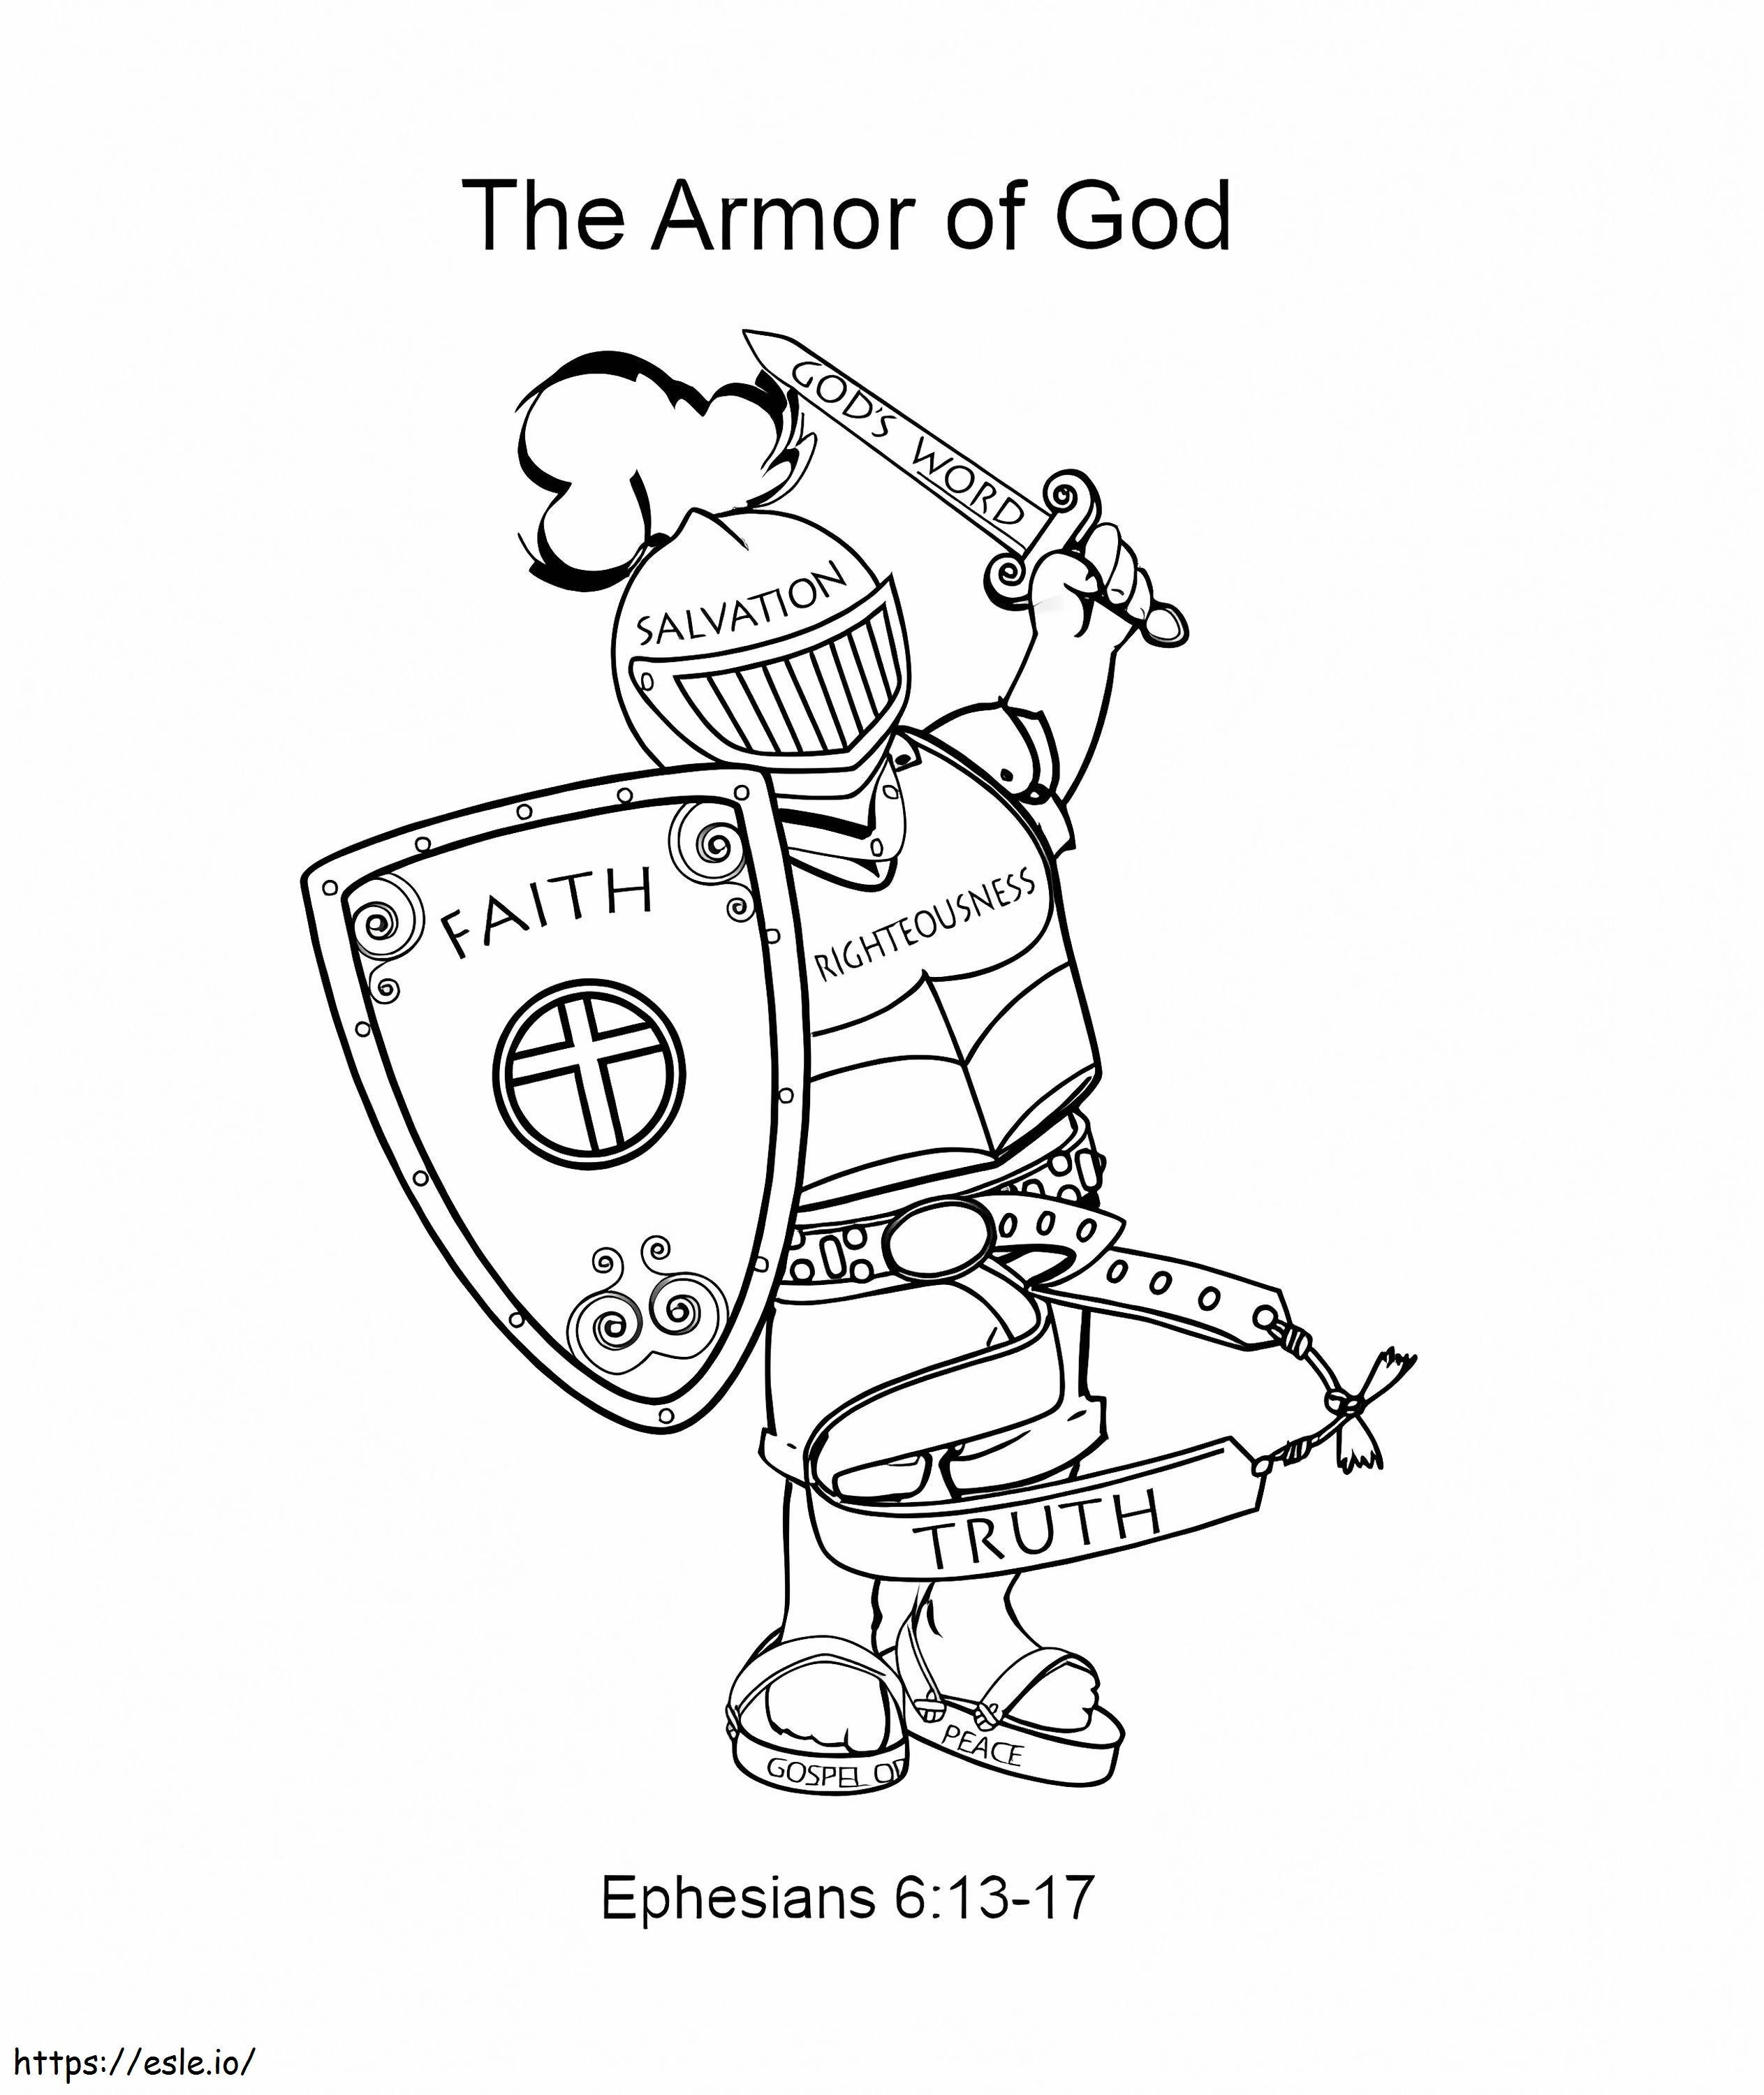 The Armor Of God coloring page